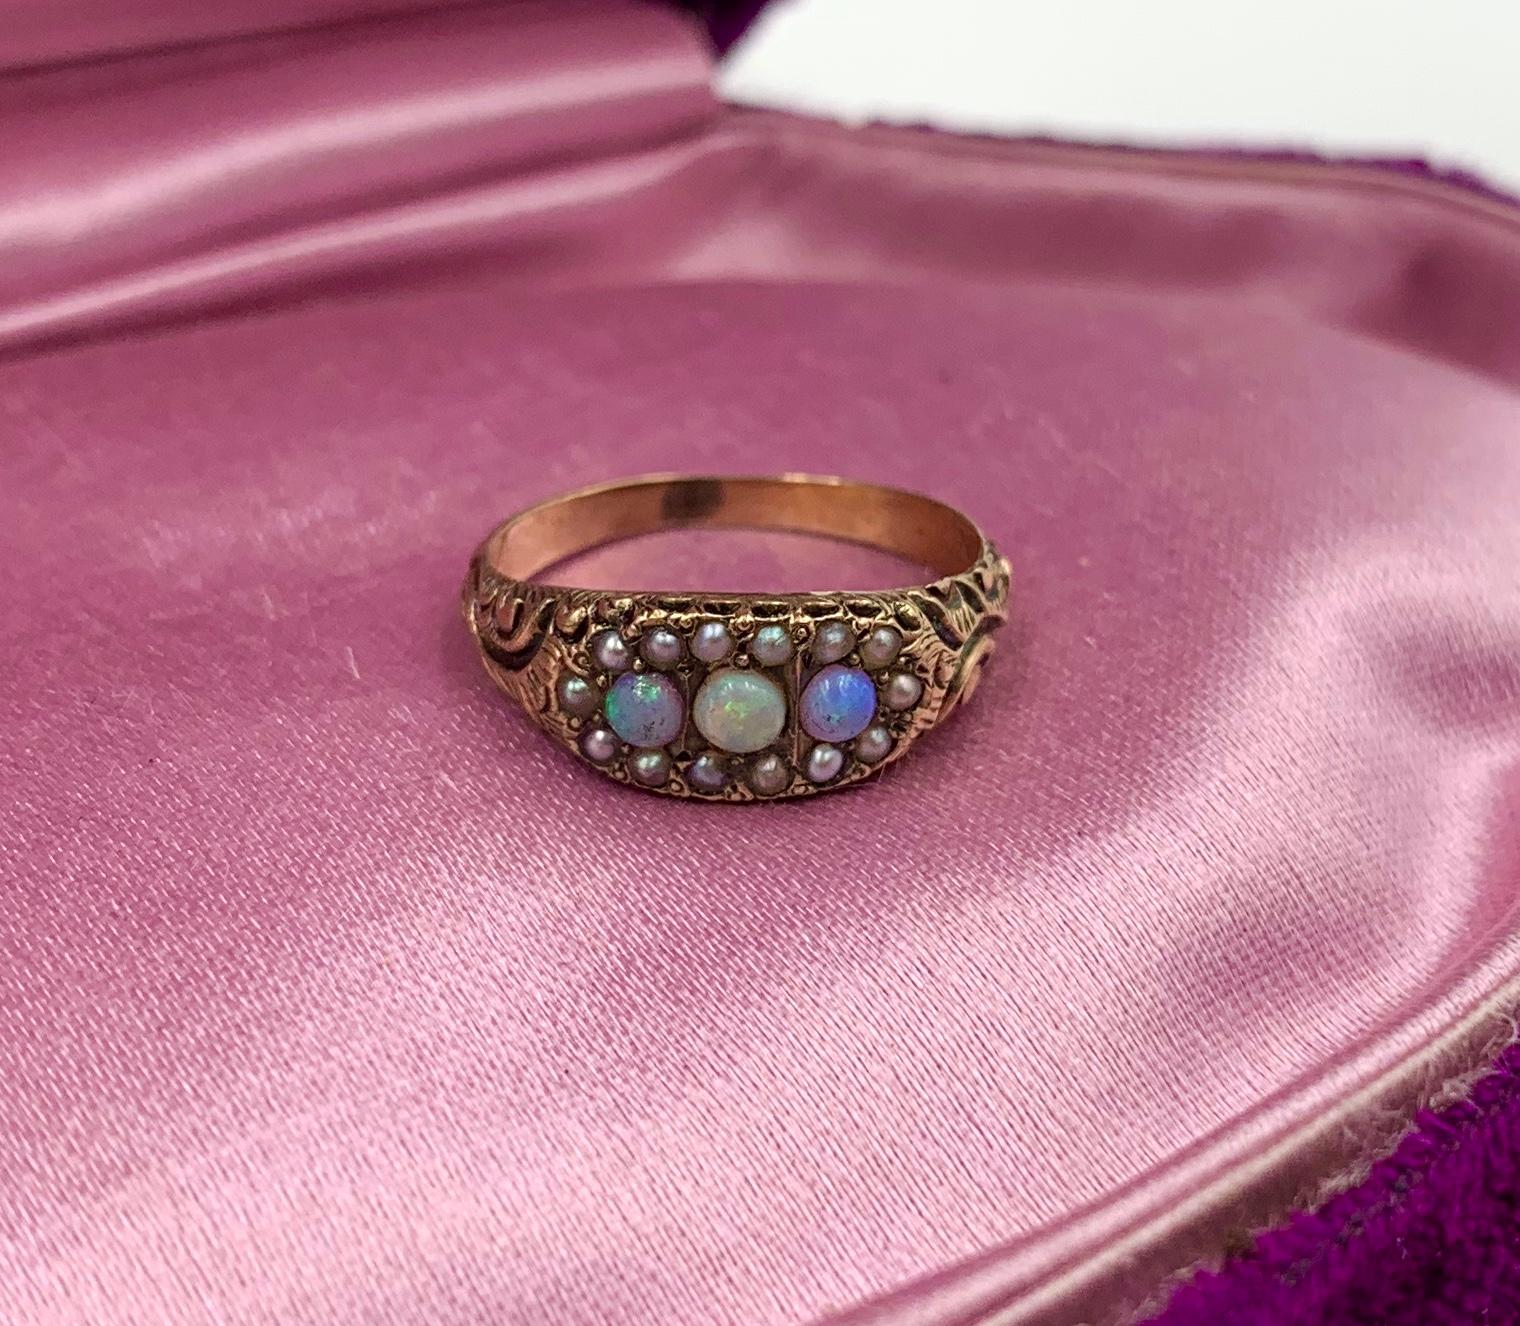 An Antique Victorian - Edwardian Ring with three gorgeous natural round Opals of stunning beauty. The three Opal gems are accented by a halo of Seed Pearls.   The jewels are set in a gorgeous engraved scroll motif setting in 10 Karat Rose Gold. 